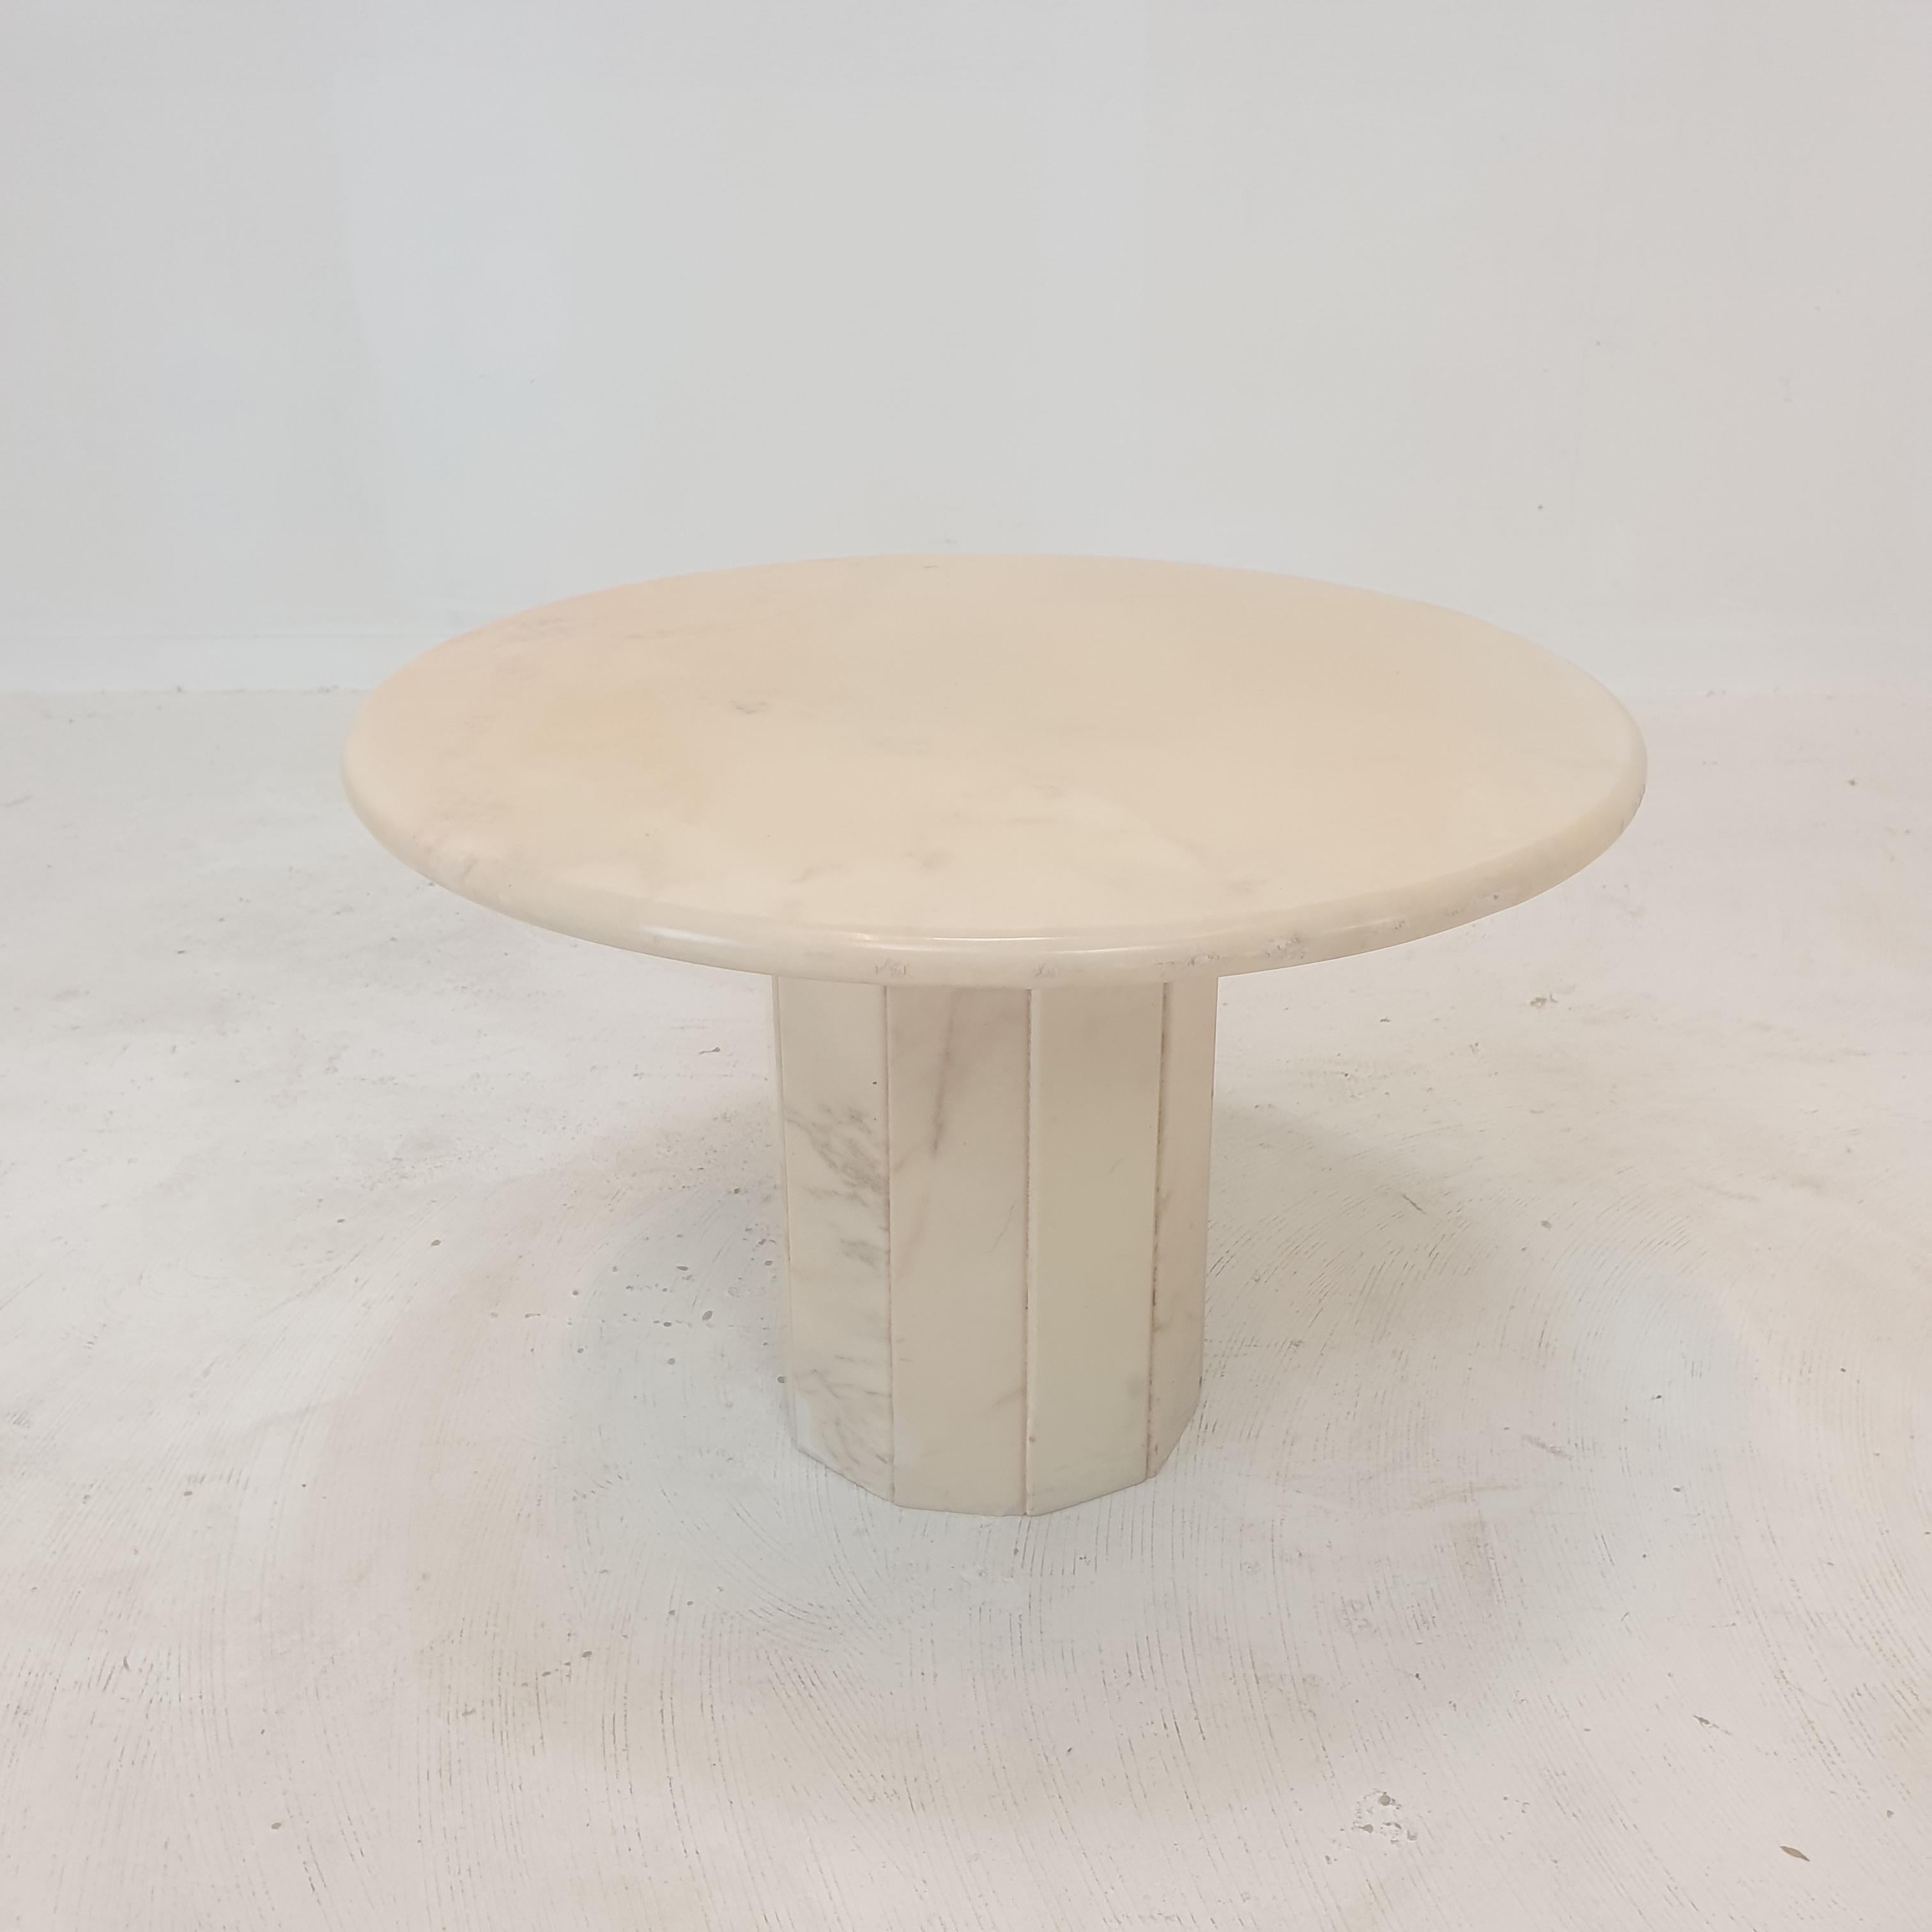 Set of 3 Italian Marble Side Tables, 1970s For Sale 5